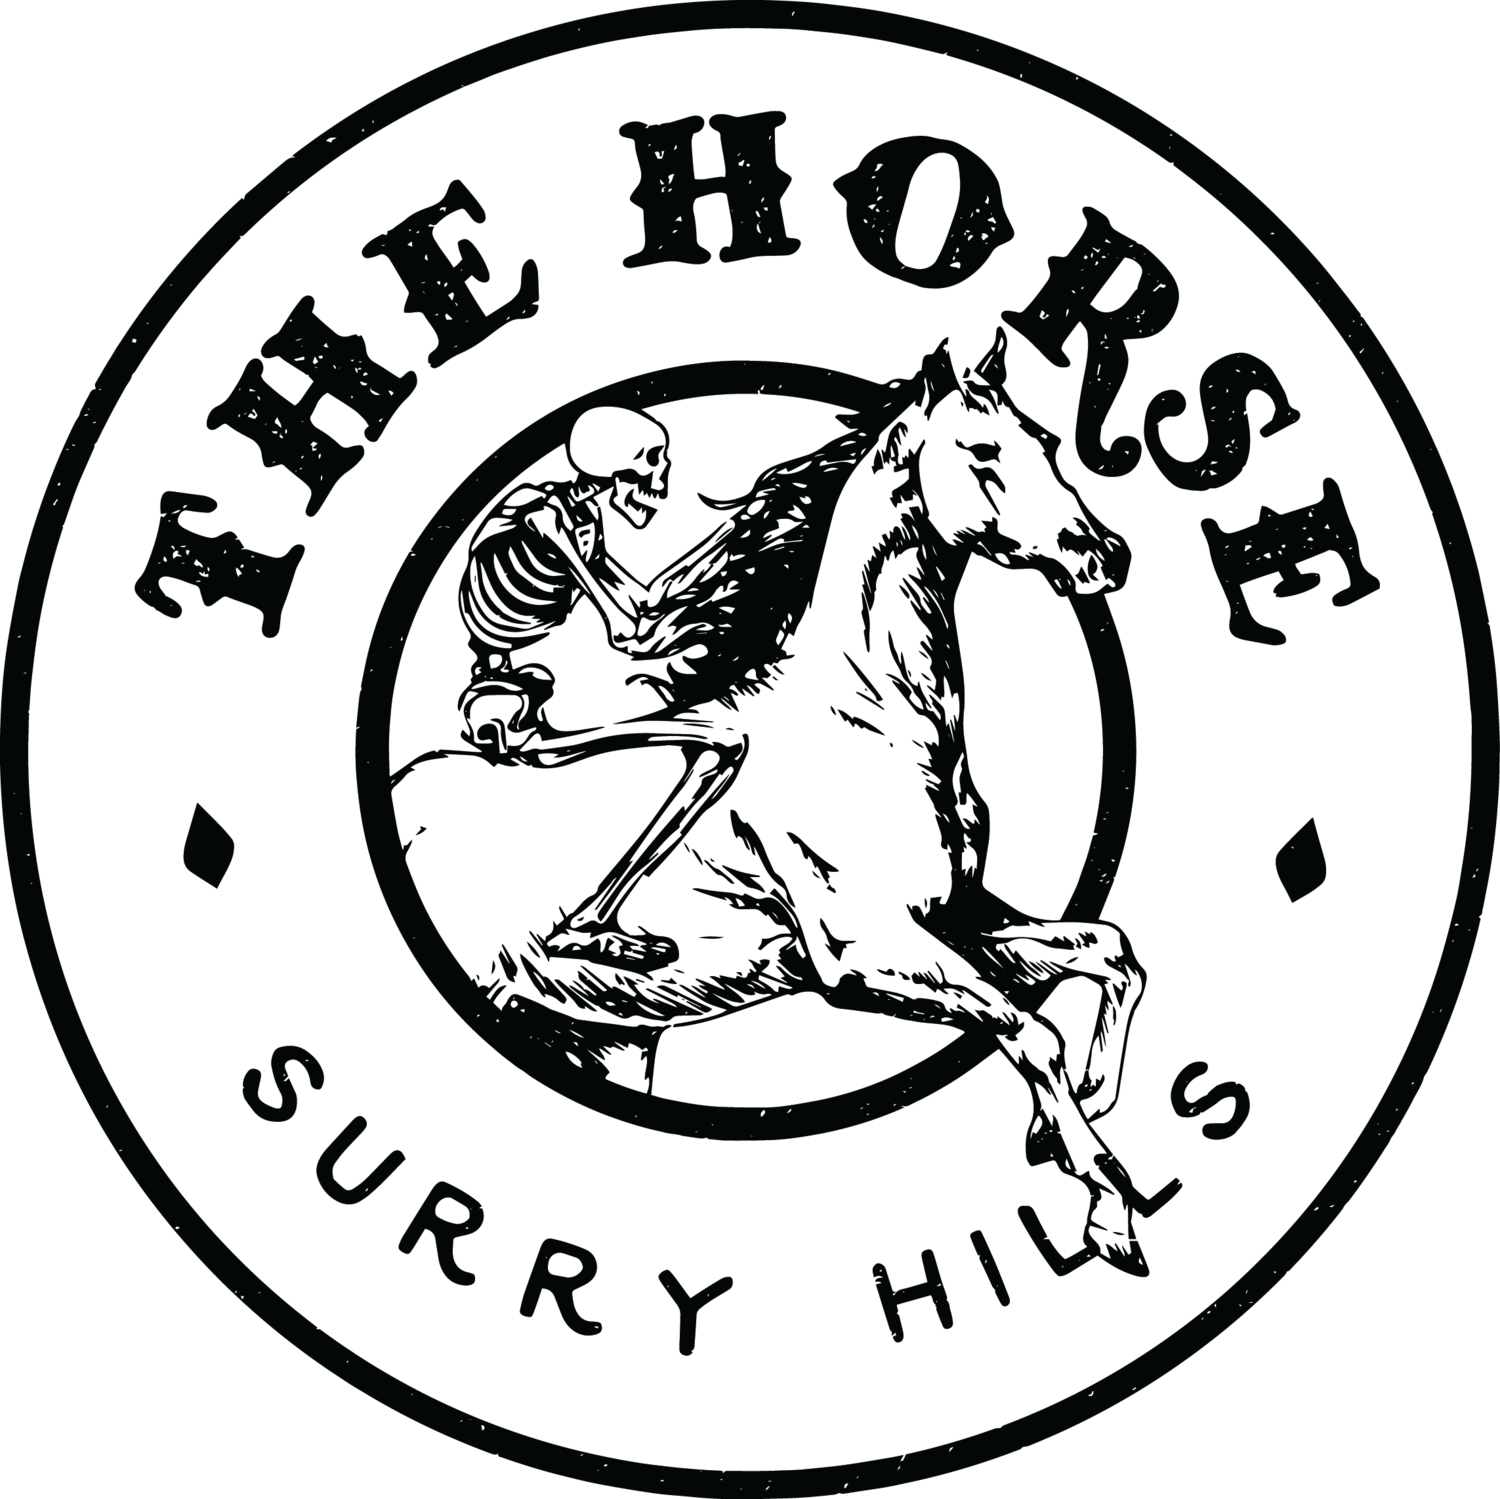 Black and White Horse Circle Logo - The Horse - Surry Hills